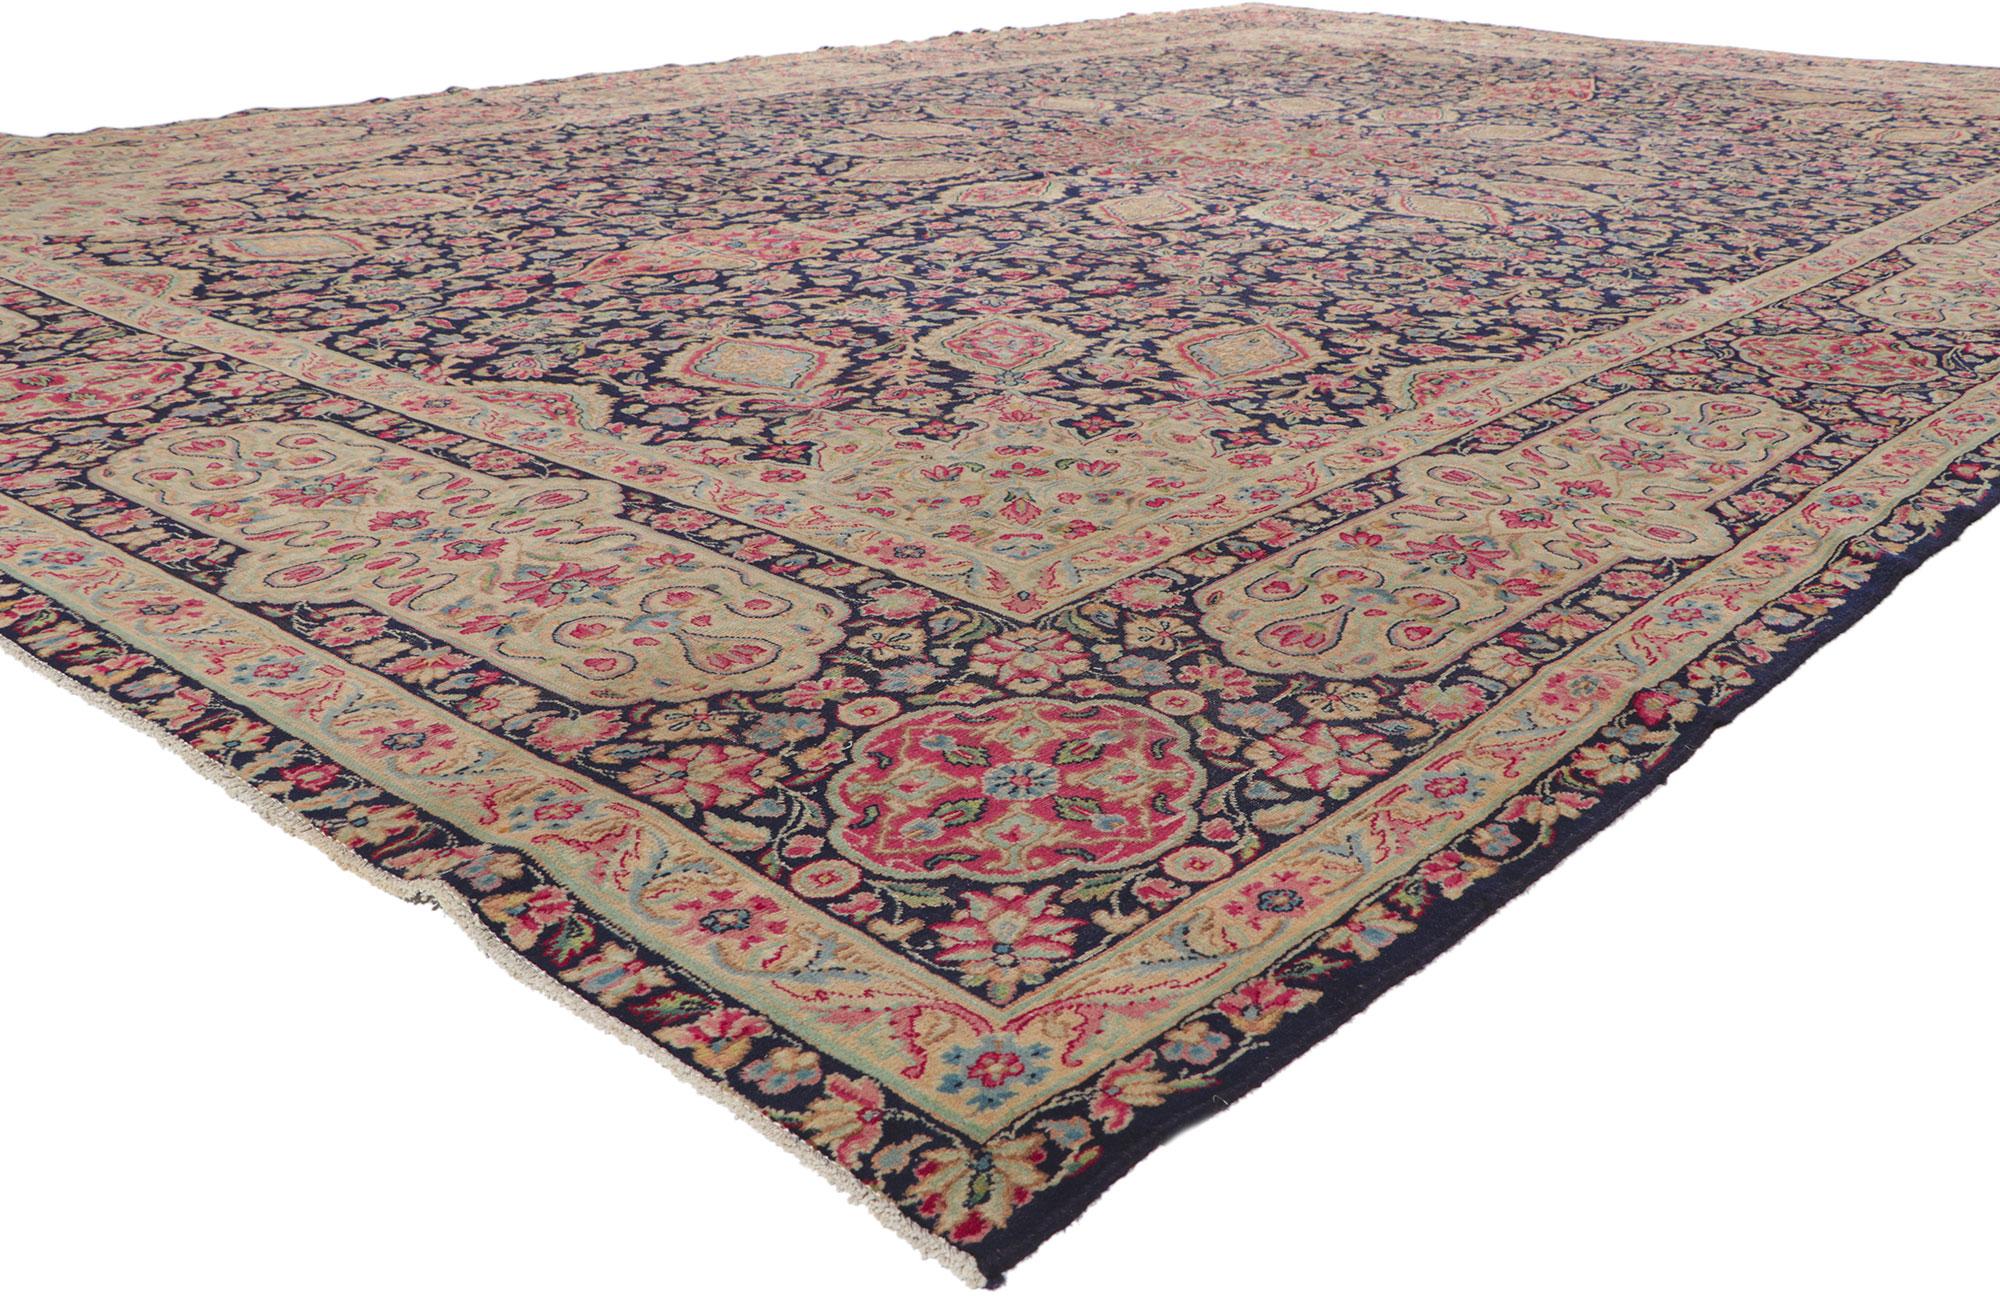 61187 Antique Persian Kerman rug with The Ardabil Carpet 11'02 x 16'09. ?Inspired from the Ardabil carpet from the Safavid dynasty, this hand-knotted wool antique Persian Kerman rug is poised to impress. The abrashed navy blue field features a